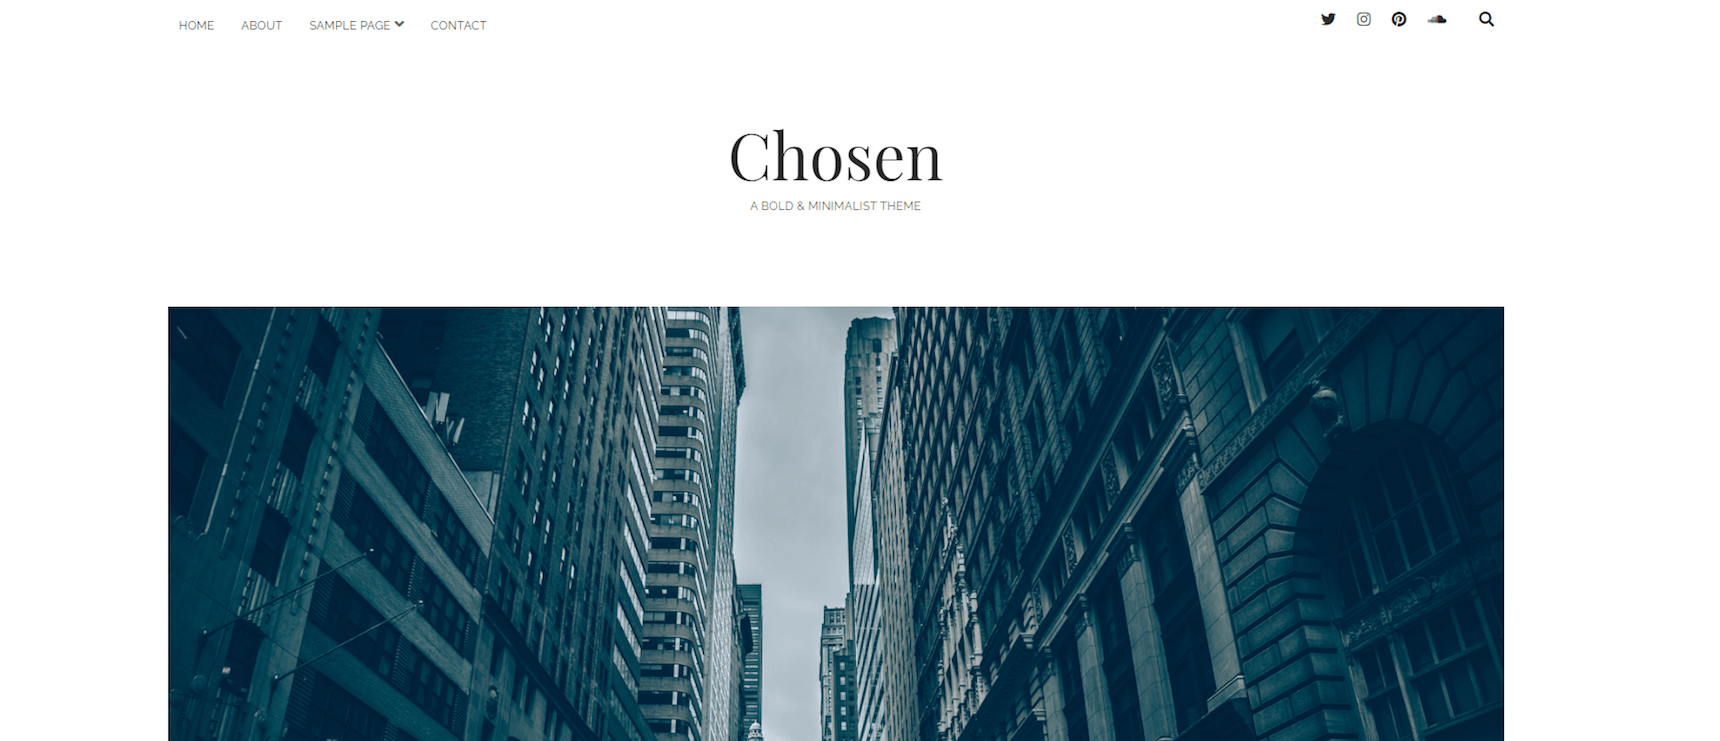 Chosen theme by Ben Sibley at Competethemes